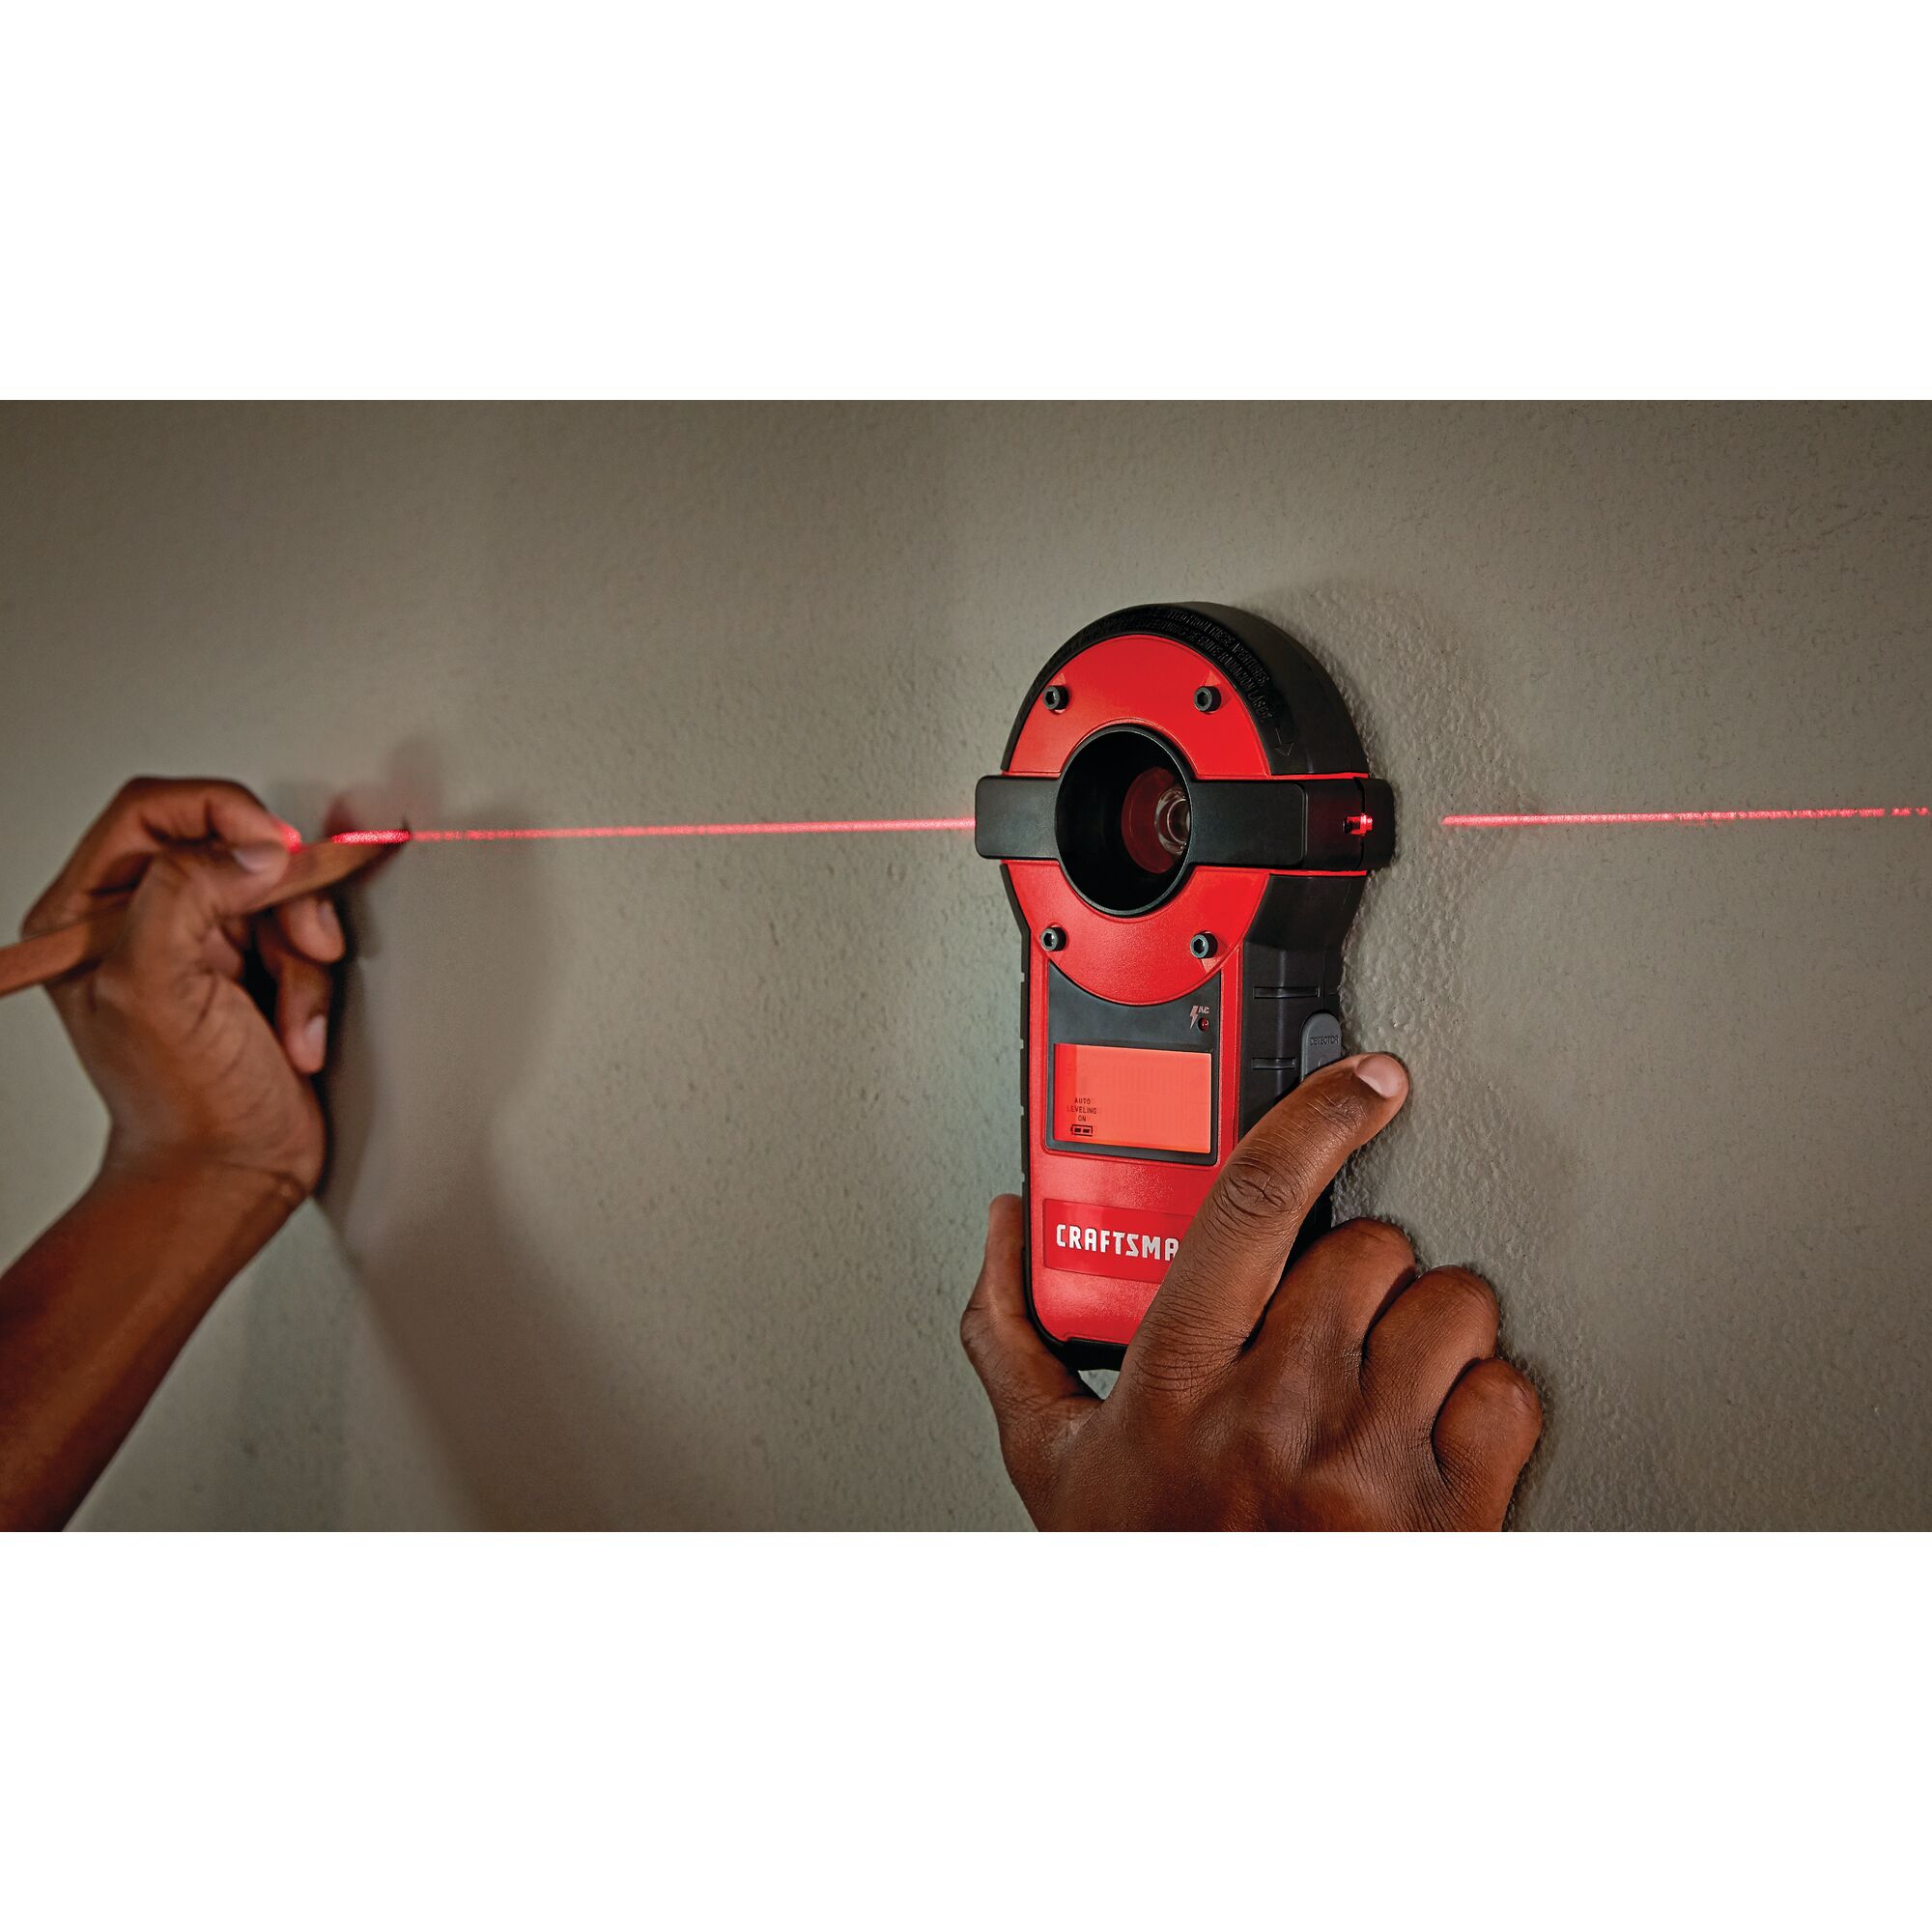 View of CRAFTSMAN Measuring: Laser Level being used by consumer